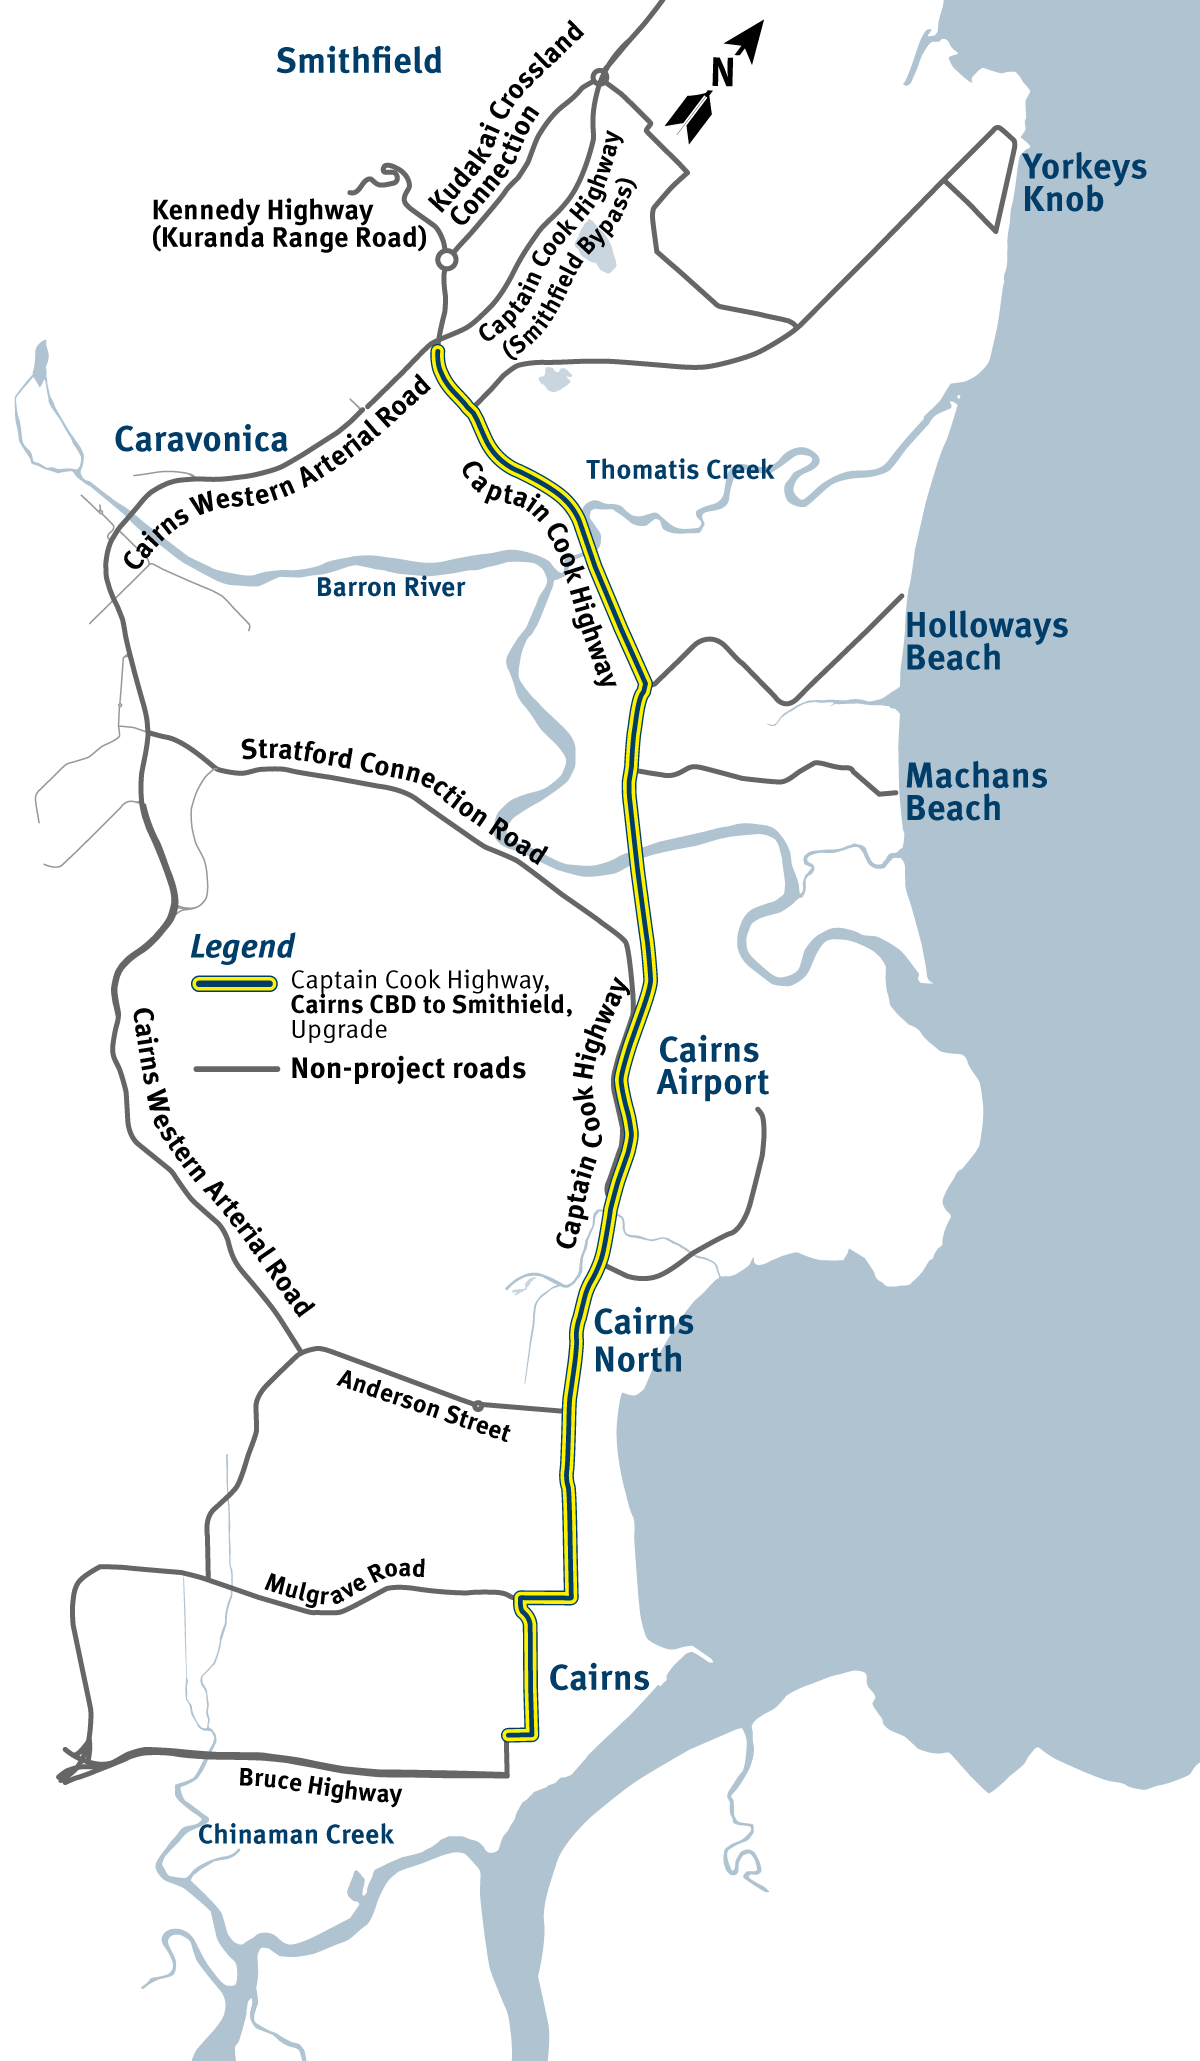 Captain Cook Highway, Cairns CBD to Smithfield, Upgrade alignment map